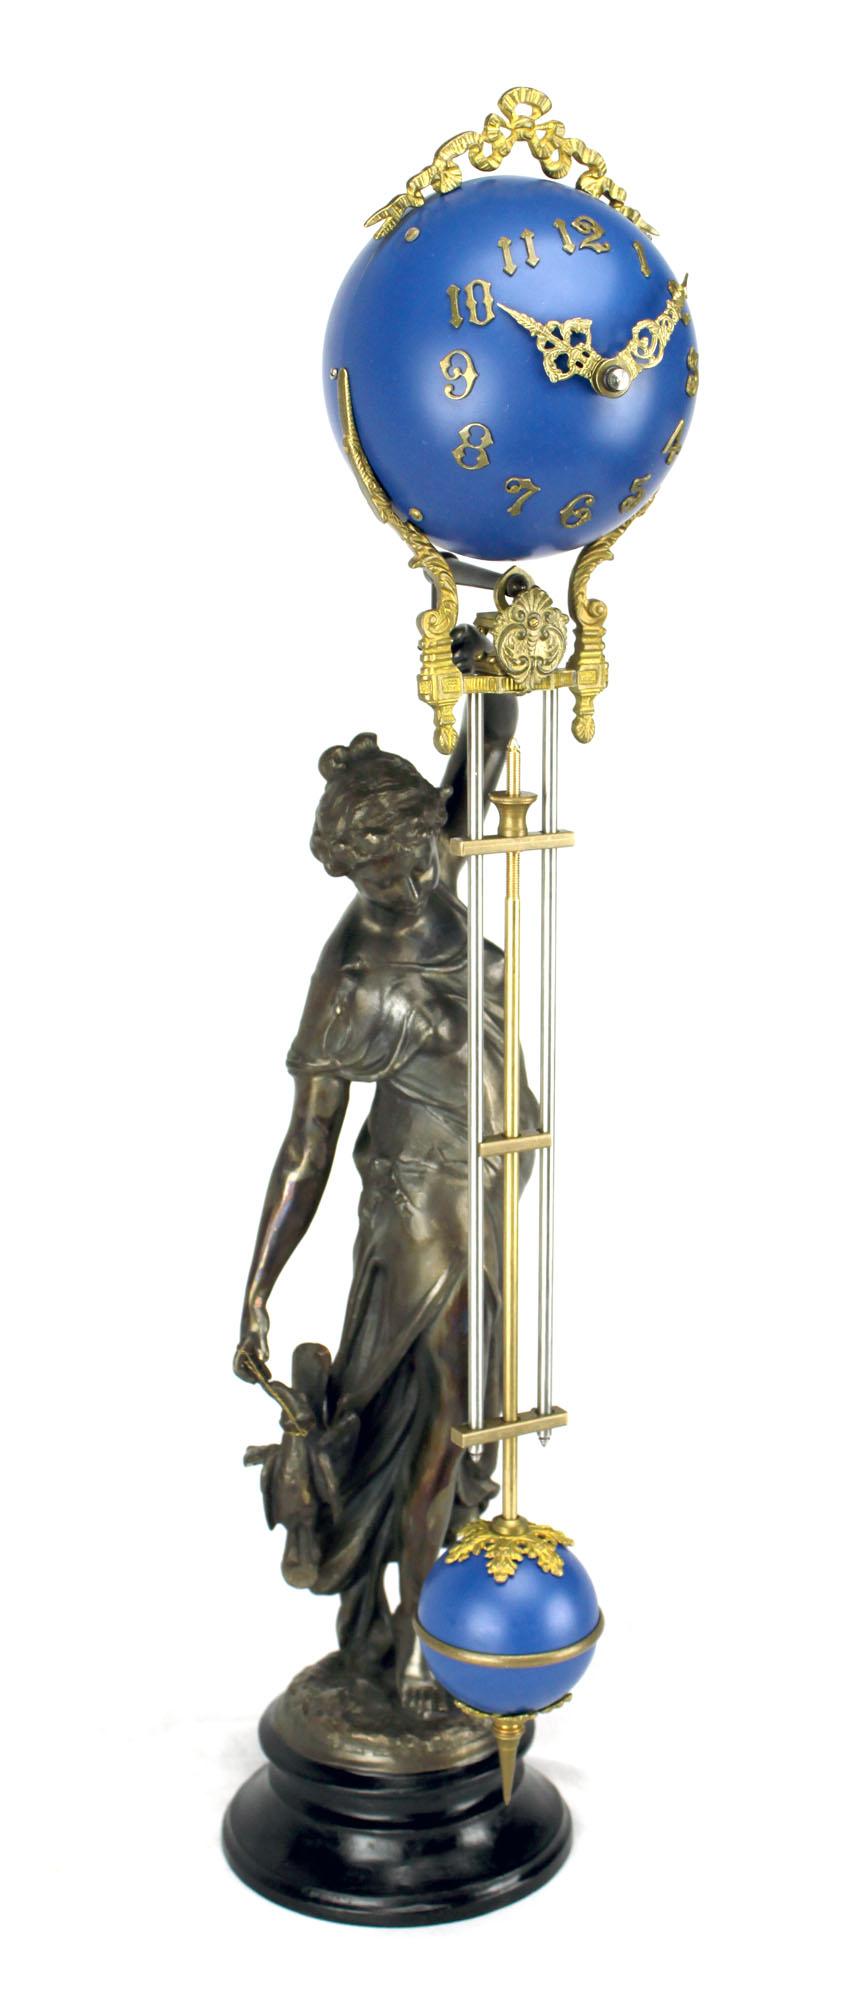 Here is an excellent condition brass Huntress lady figure mystery swinging clock. It comes with an 8 day wind up mechanical movement. Time reads from the decorative brass hands over matte cobalt blue color brass 4